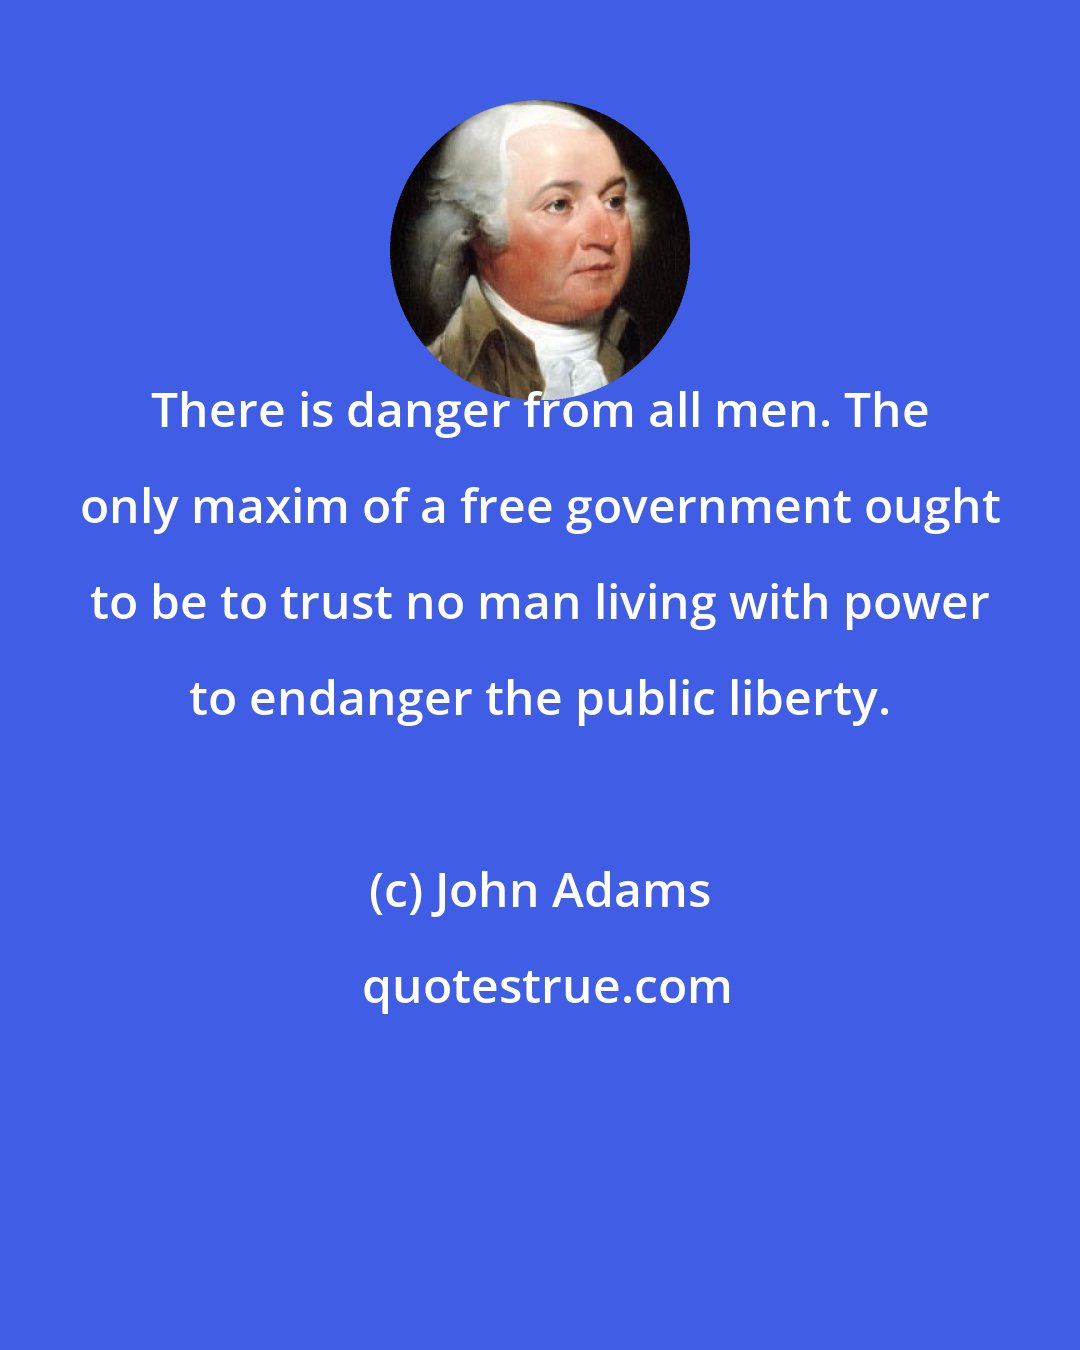 John Adams: There is danger from all men. The only maxim of a free government ought to be to trust no man living with power to endanger the public liberty.